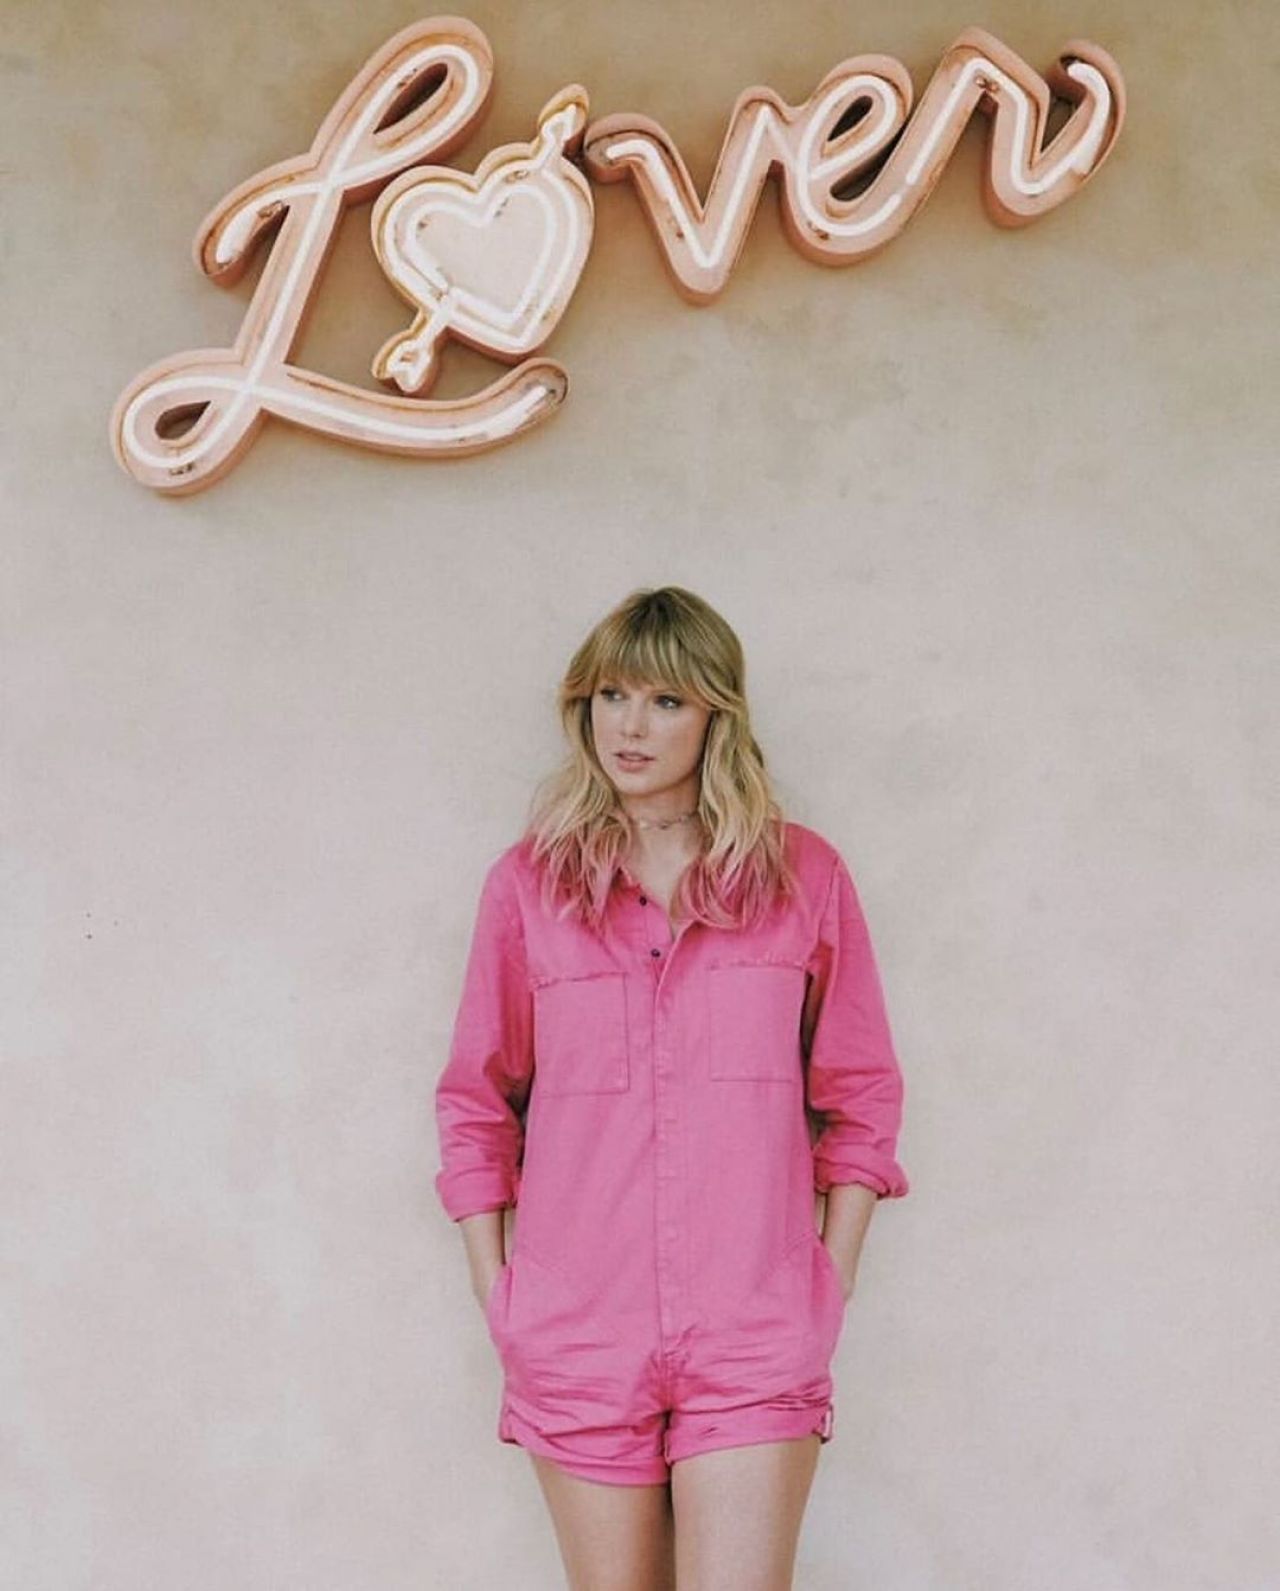 Taylor Swift – Photoshoot for “Lover” Album 2019 (more photos)